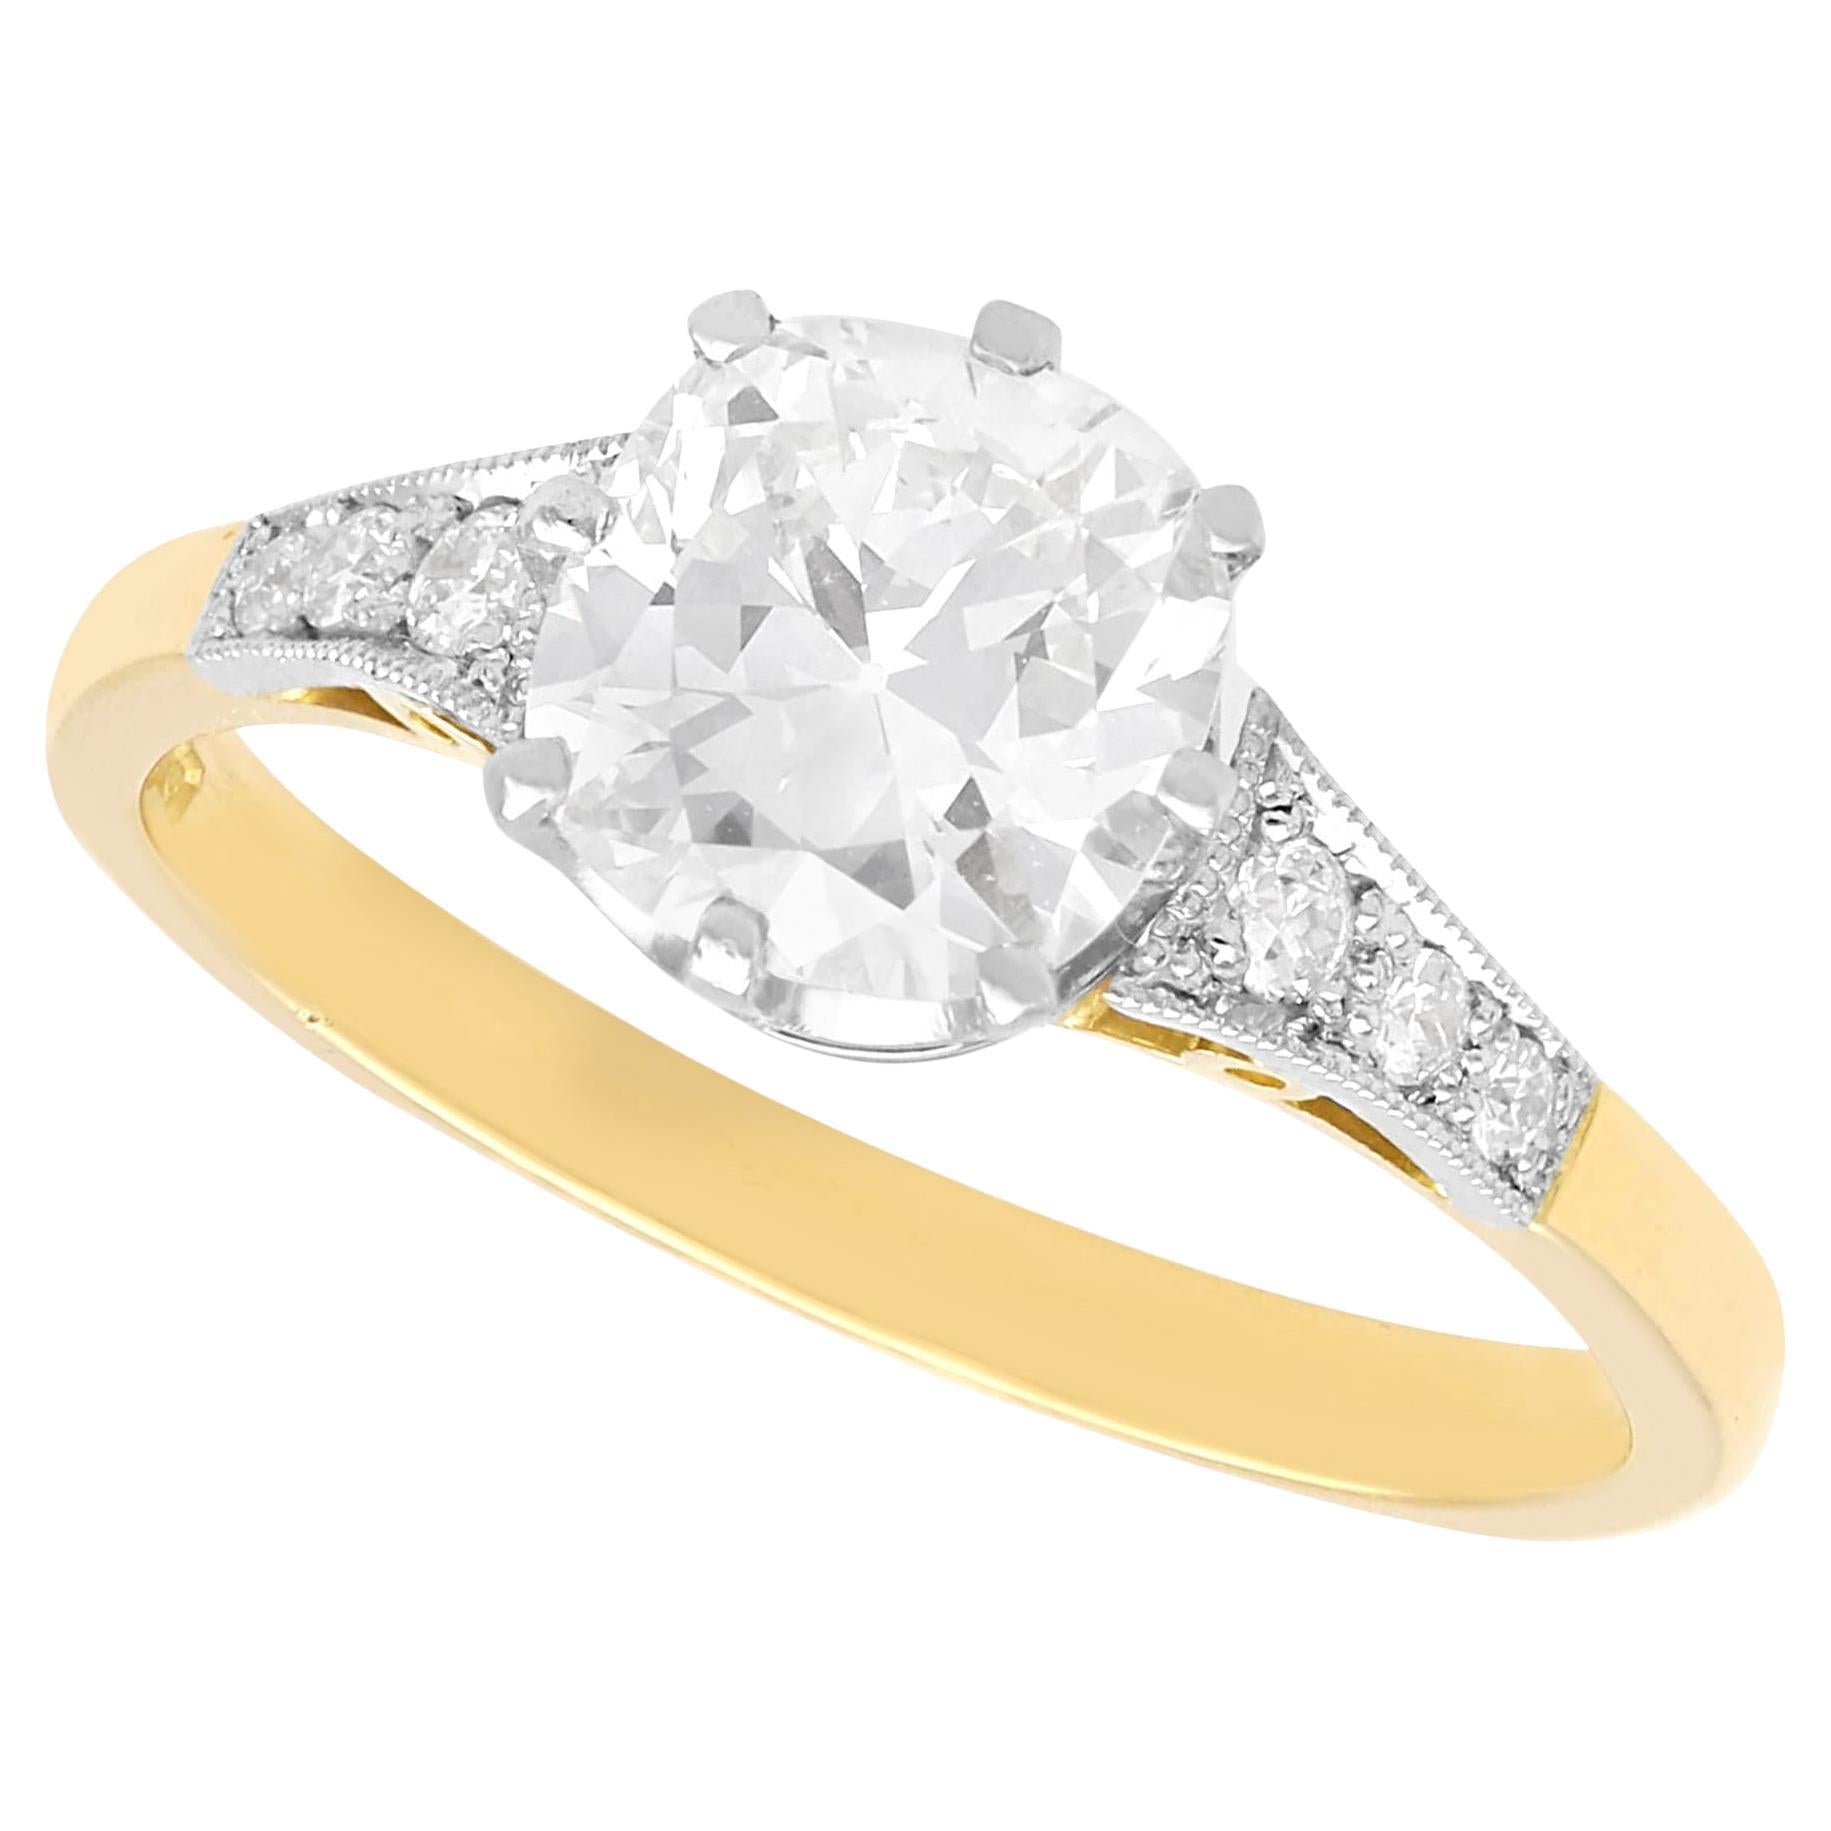 Antique and Contemporary 1.54 Carat Diamond and Yellow Gold Solitaire Ring For Sale